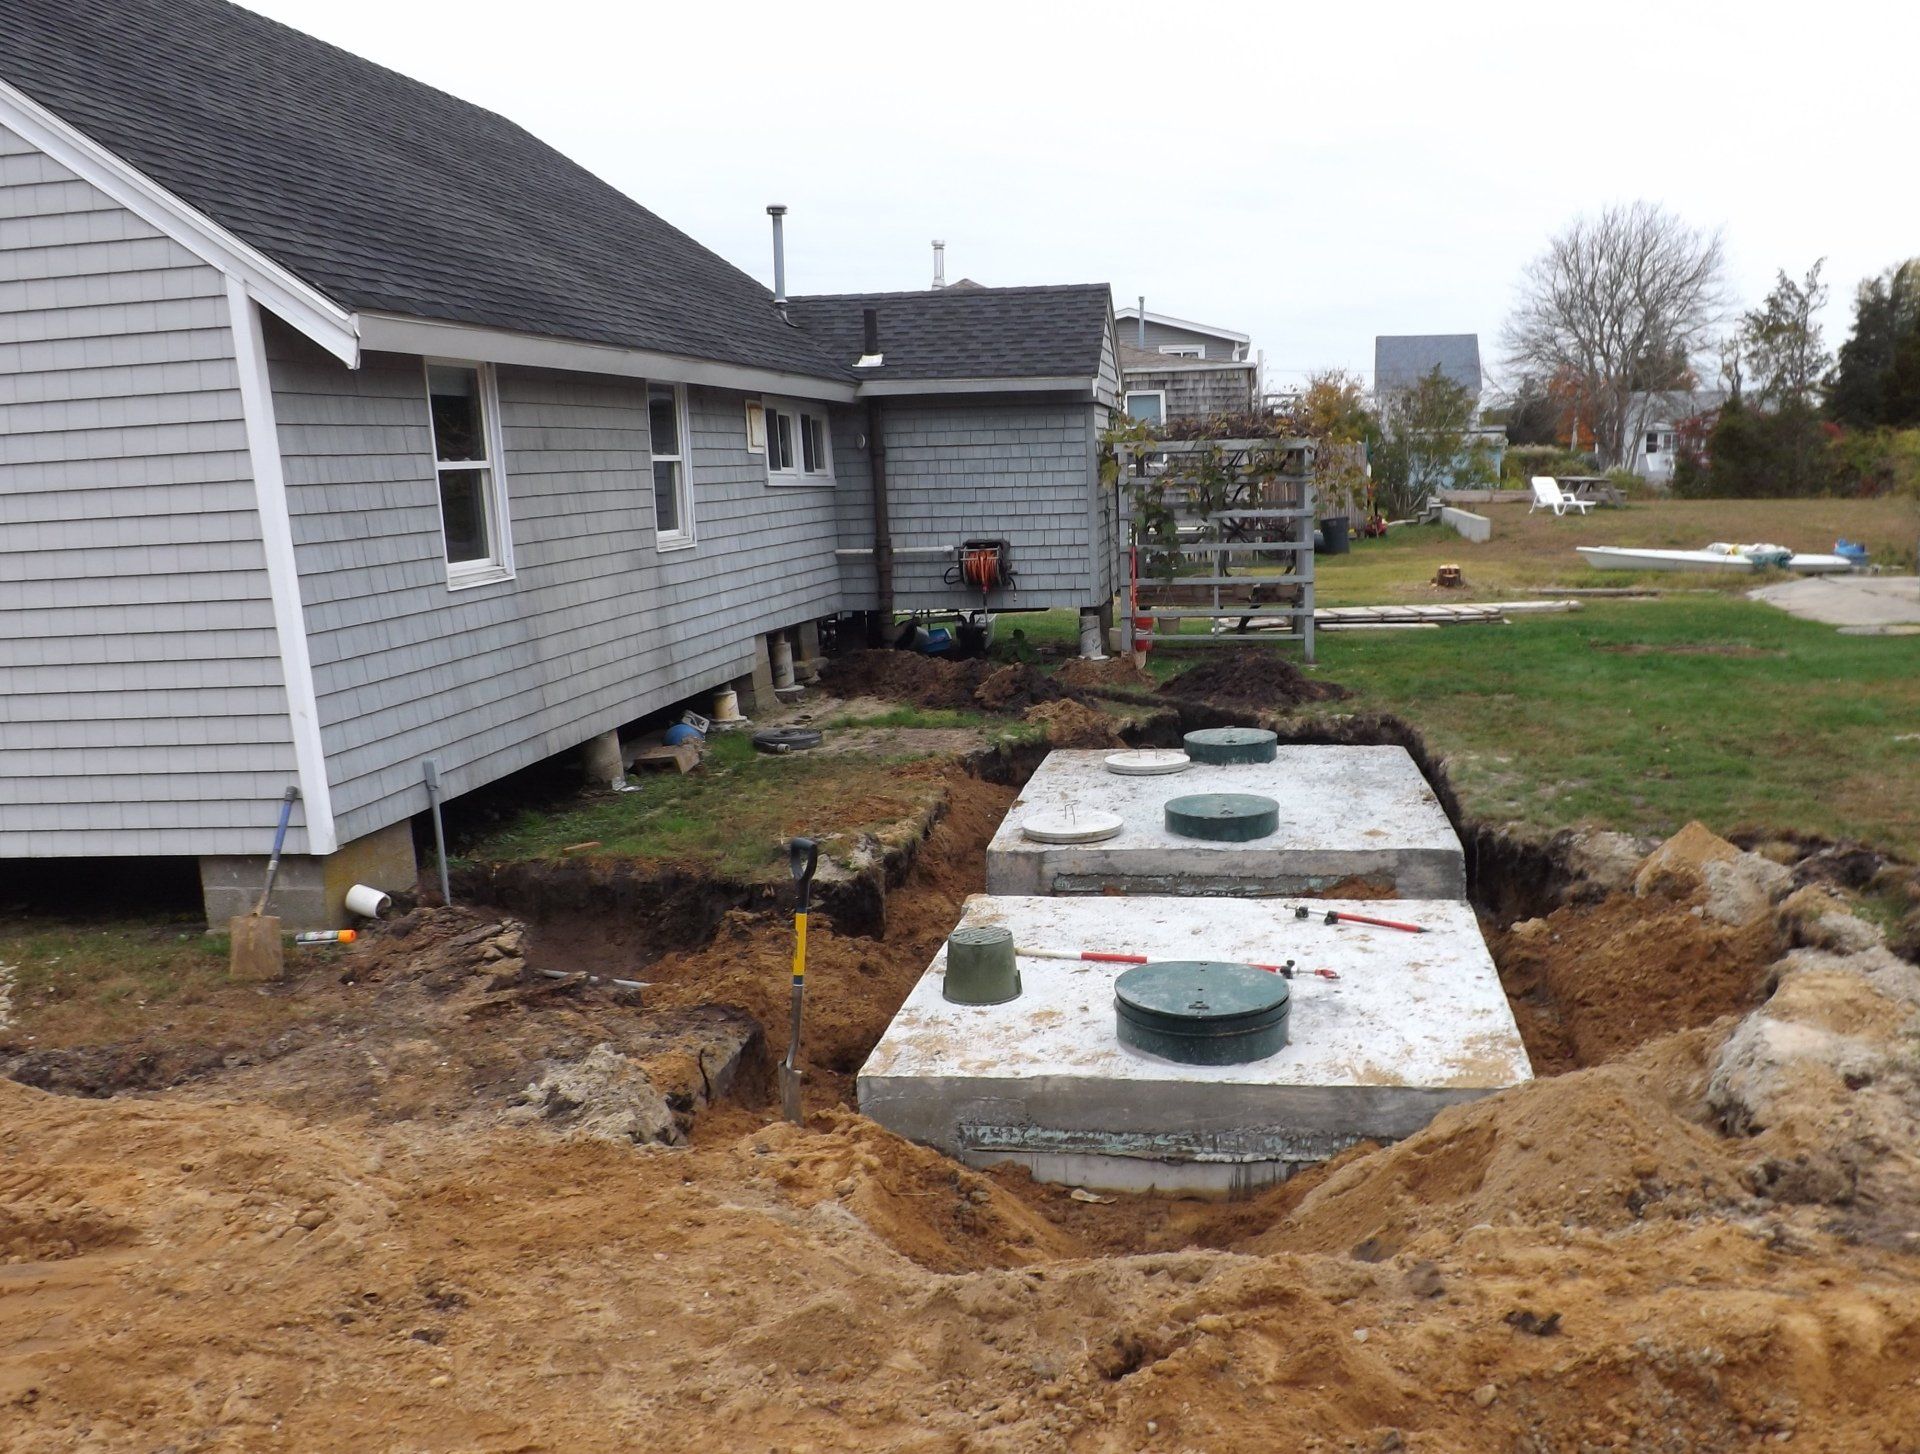 Septic Plan — Two Septic Tanks At The Back Of A House in Mattapoisett, MA